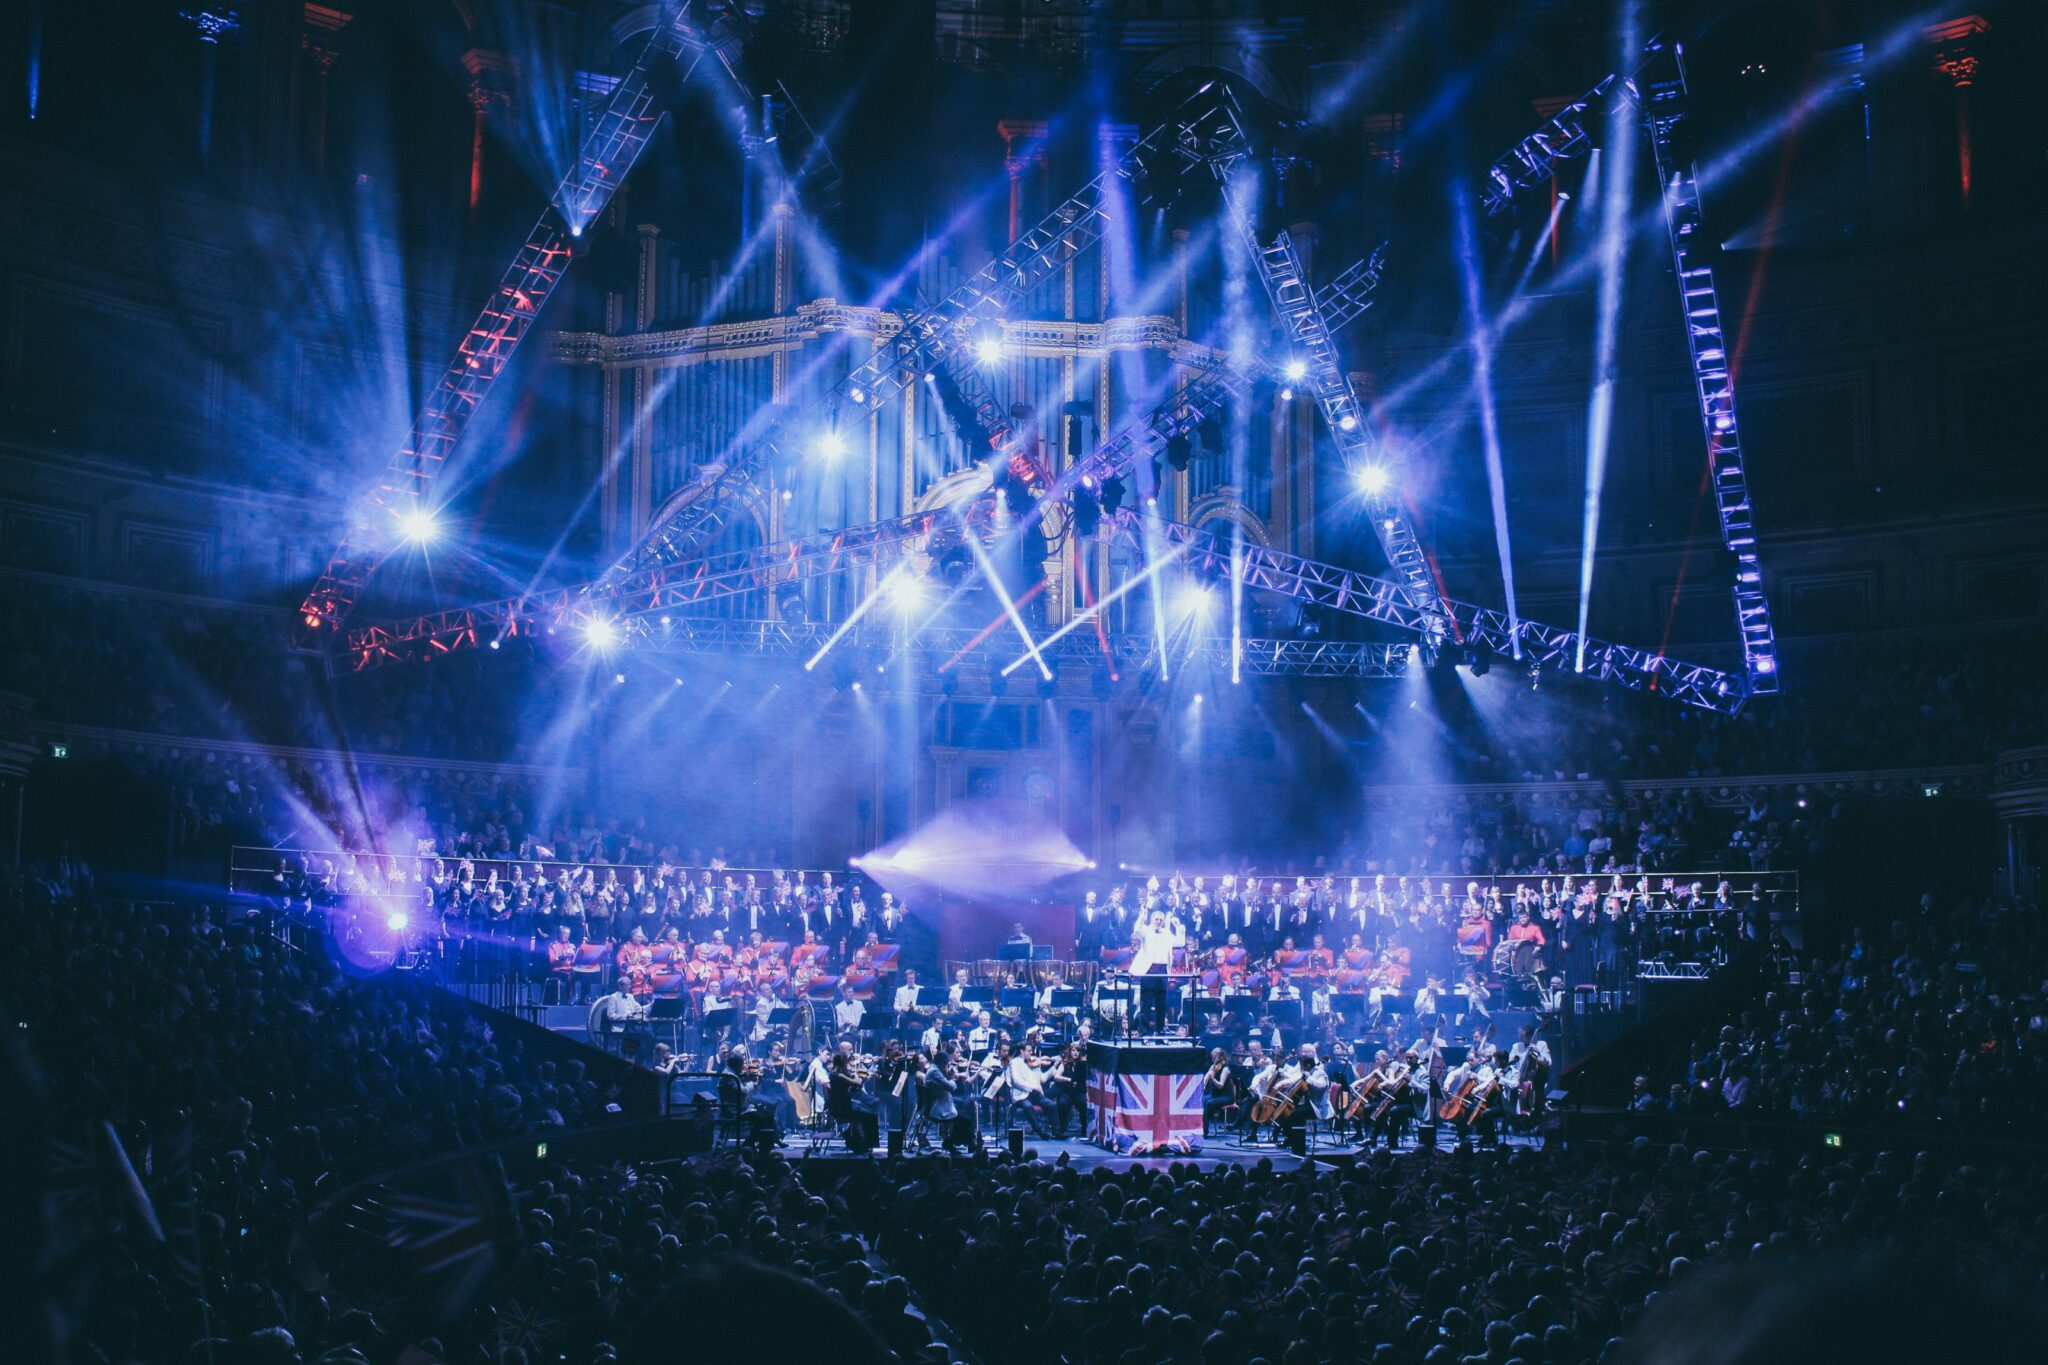 Orchestra playing at the Royal Albert Hall with flashing lights